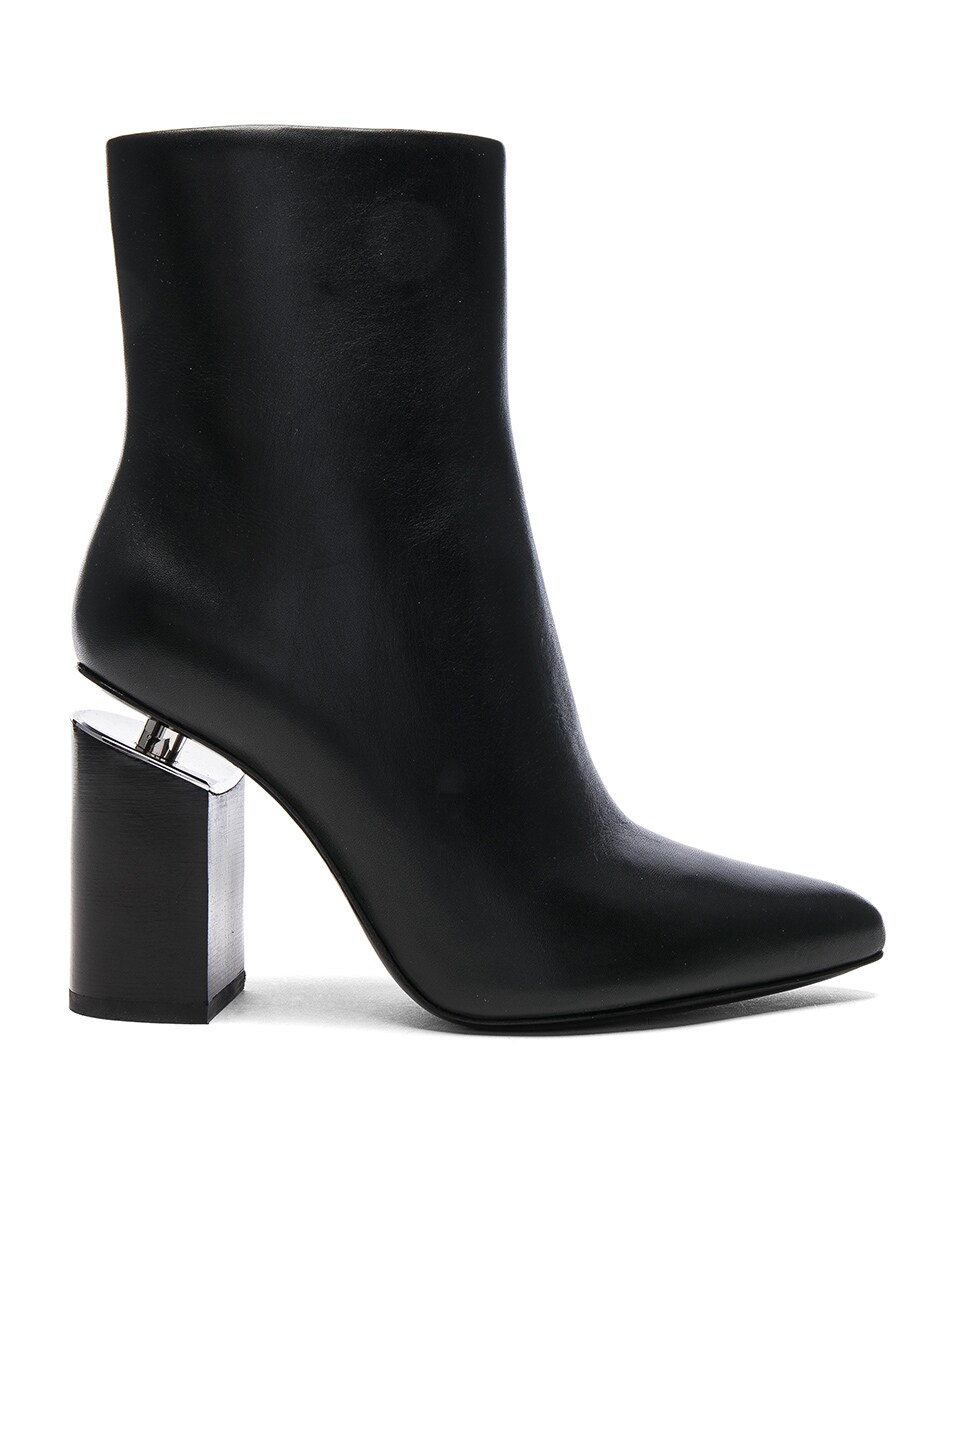 Image 1 of Alexander Wang Kirby Leather Boots in Black